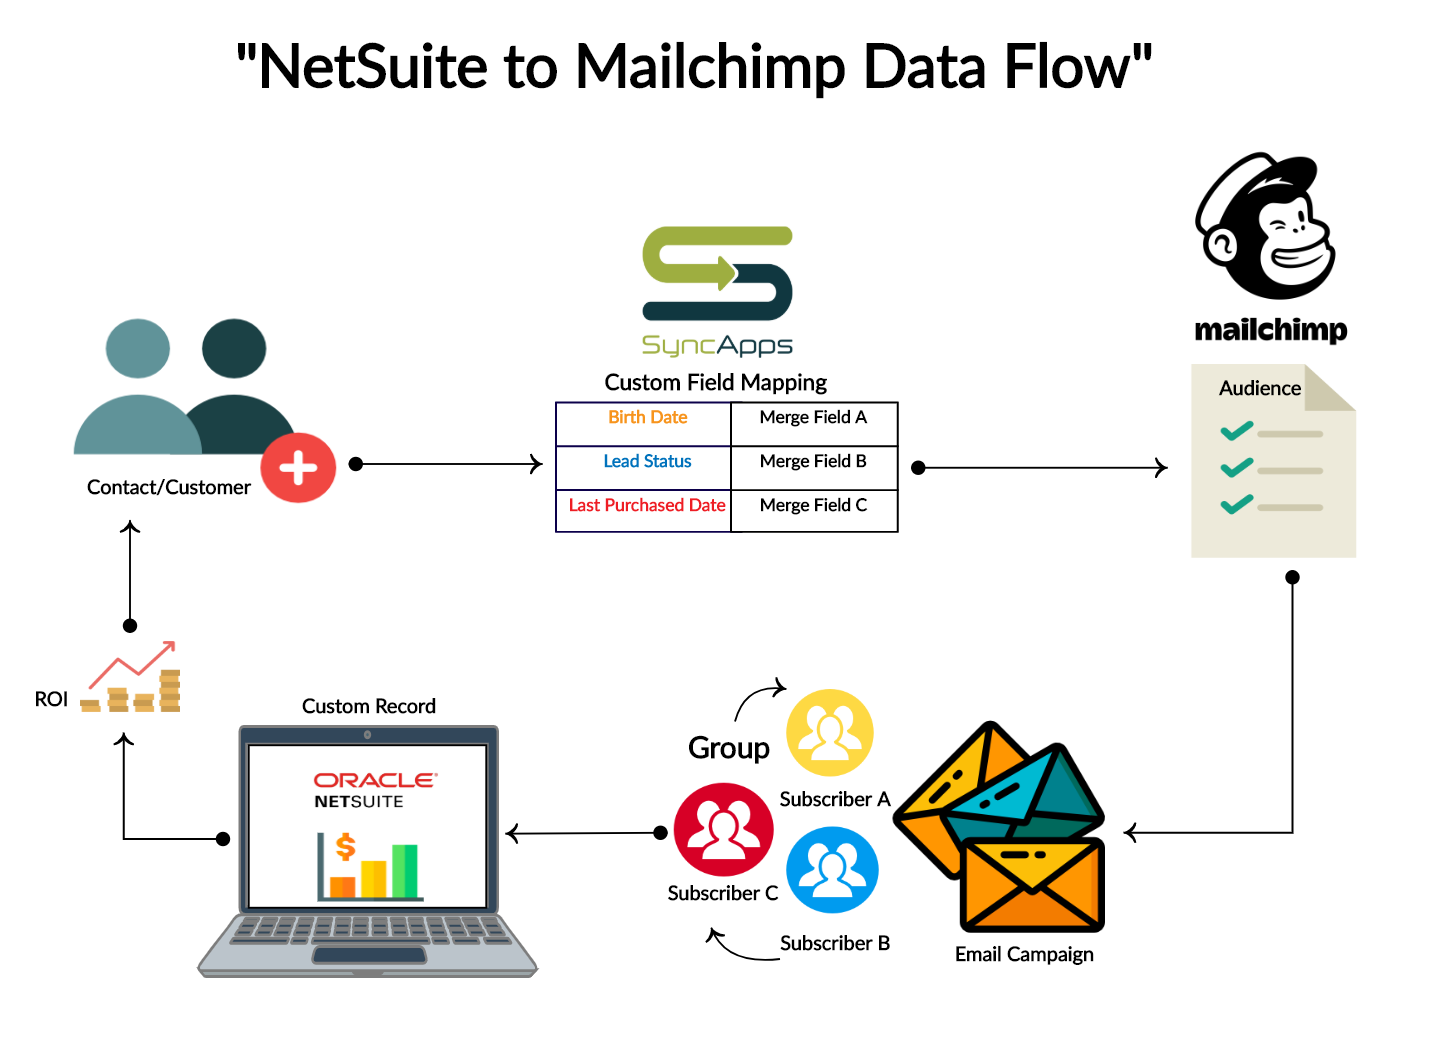 NetSuite for Mailchimp